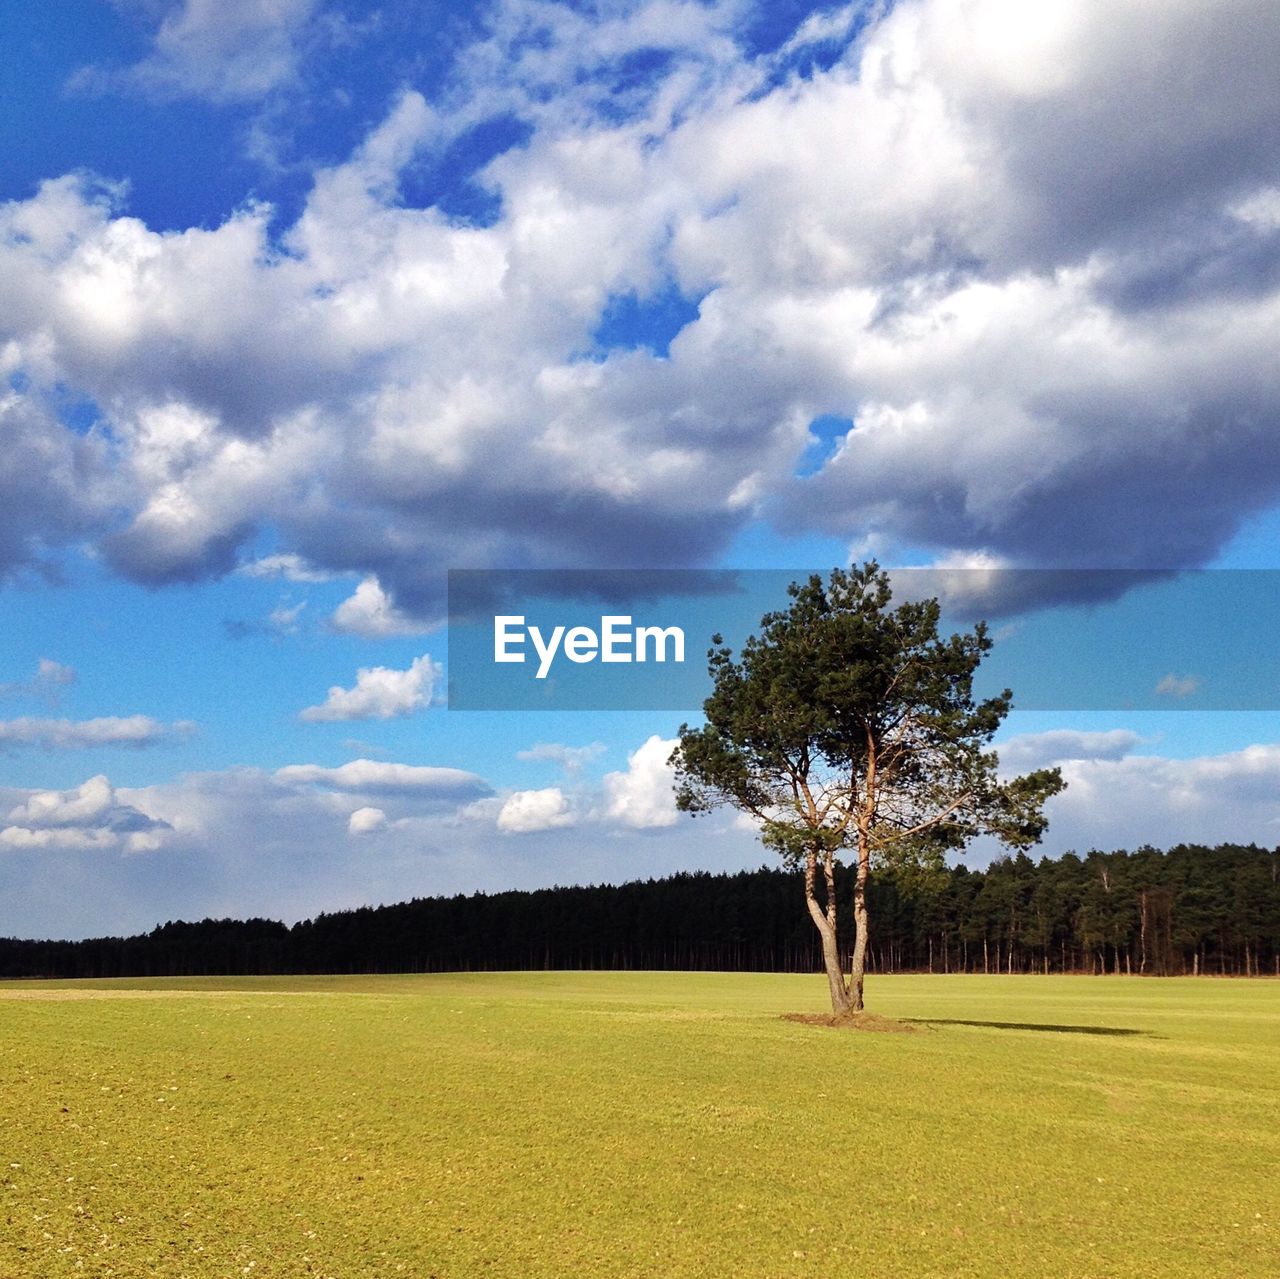 Trees growing on grassy field against sky